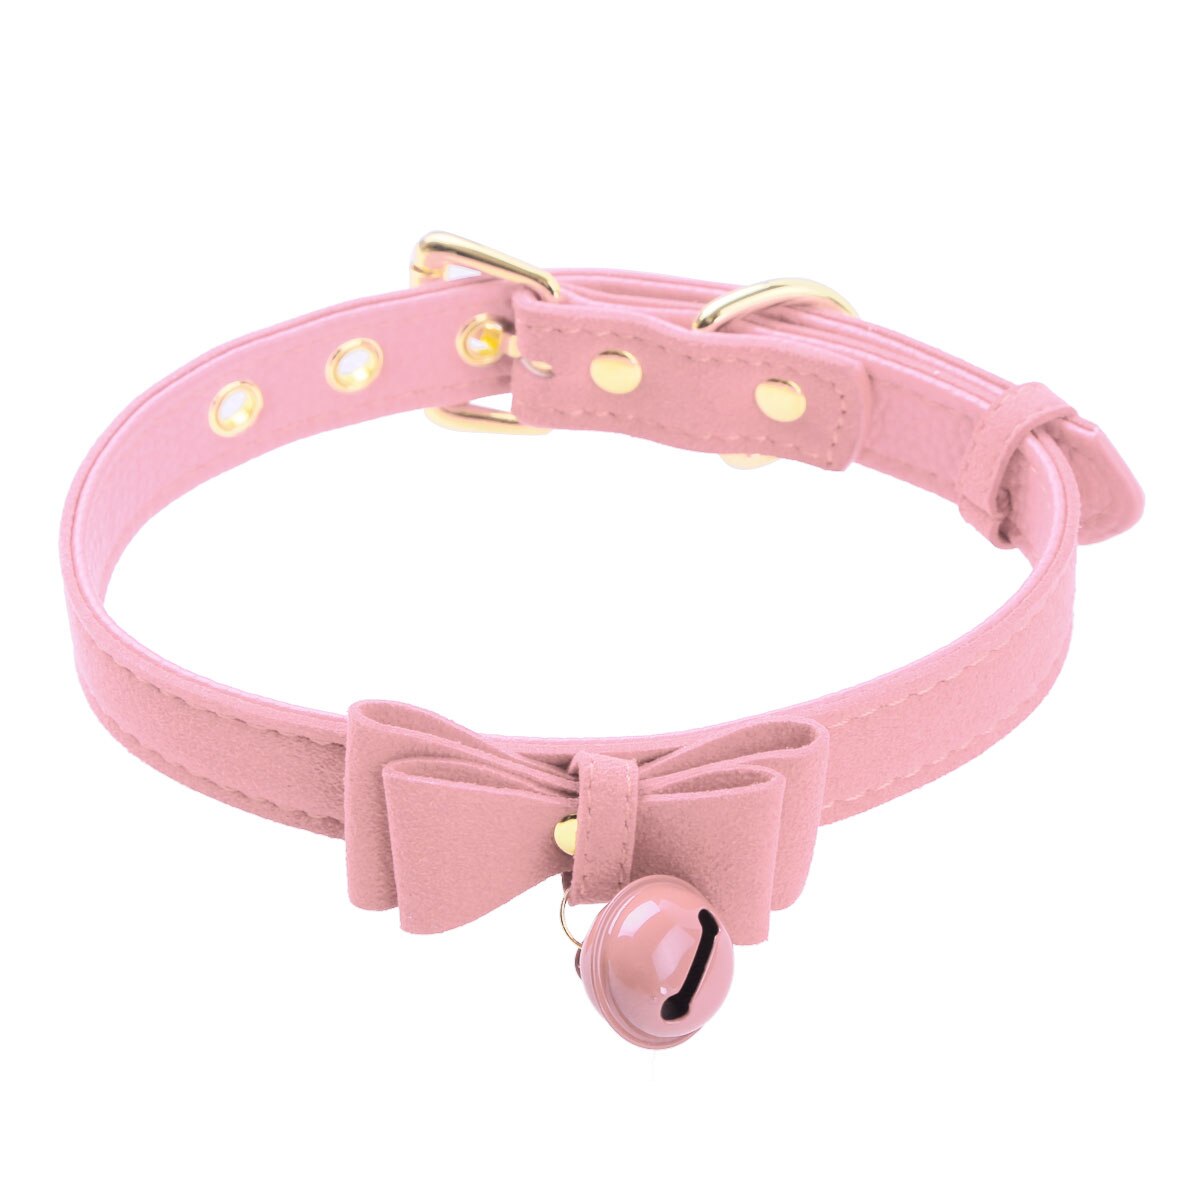 Women and Girls PU Leather Adjustable Bow Tie Neck Choker Collar Necklace with Bell For Halloween Cat Costume Cosplay: Pink